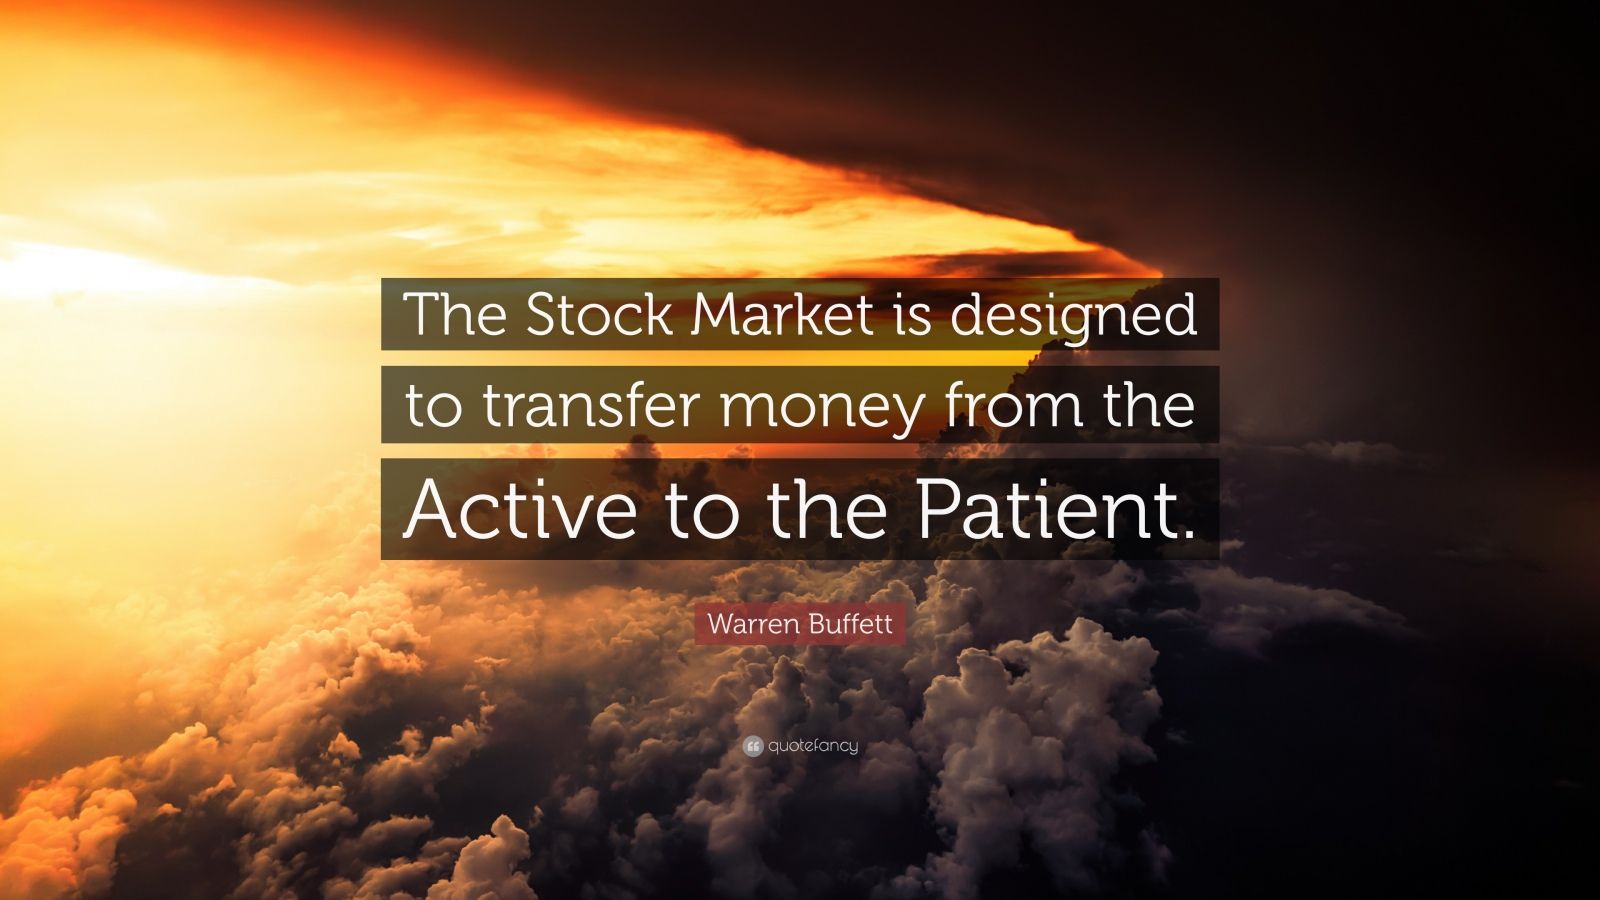 Warren Buffett Quote: "The Stock Market is designed to transfer money from the Active to the ...